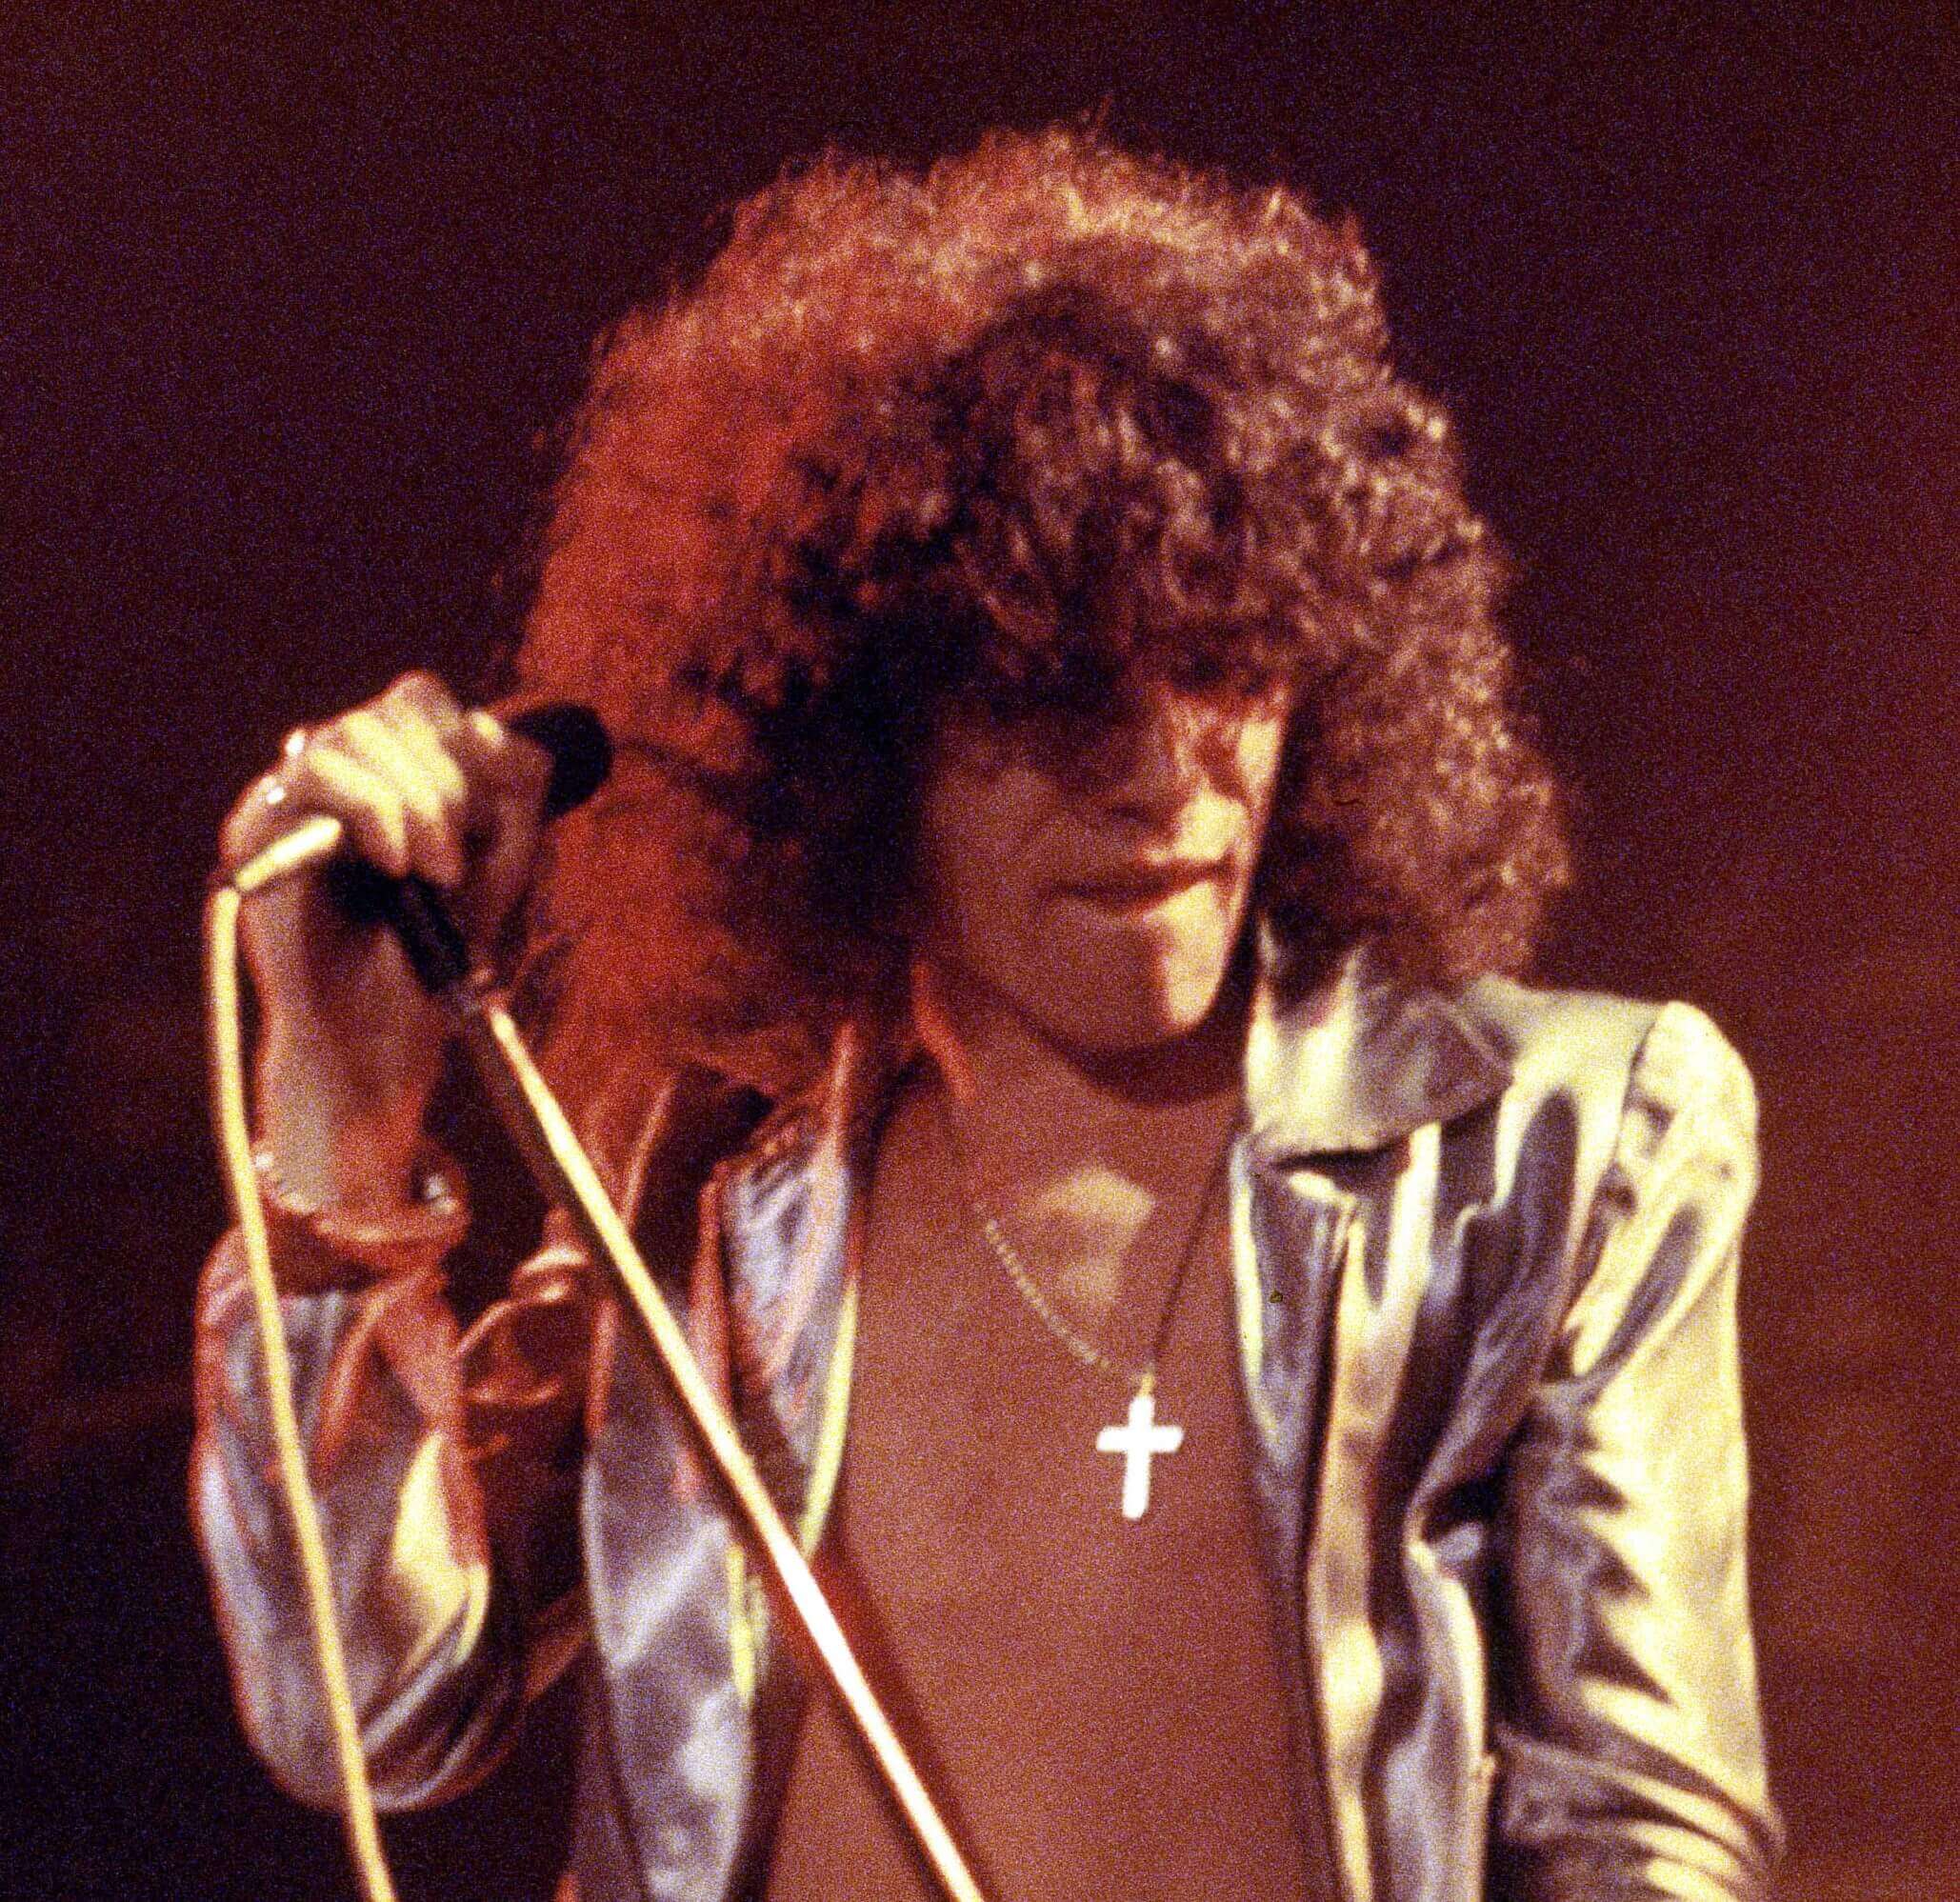 Nazareth's Dan McCafferty with a microphone during 'Hair of the Dog' era